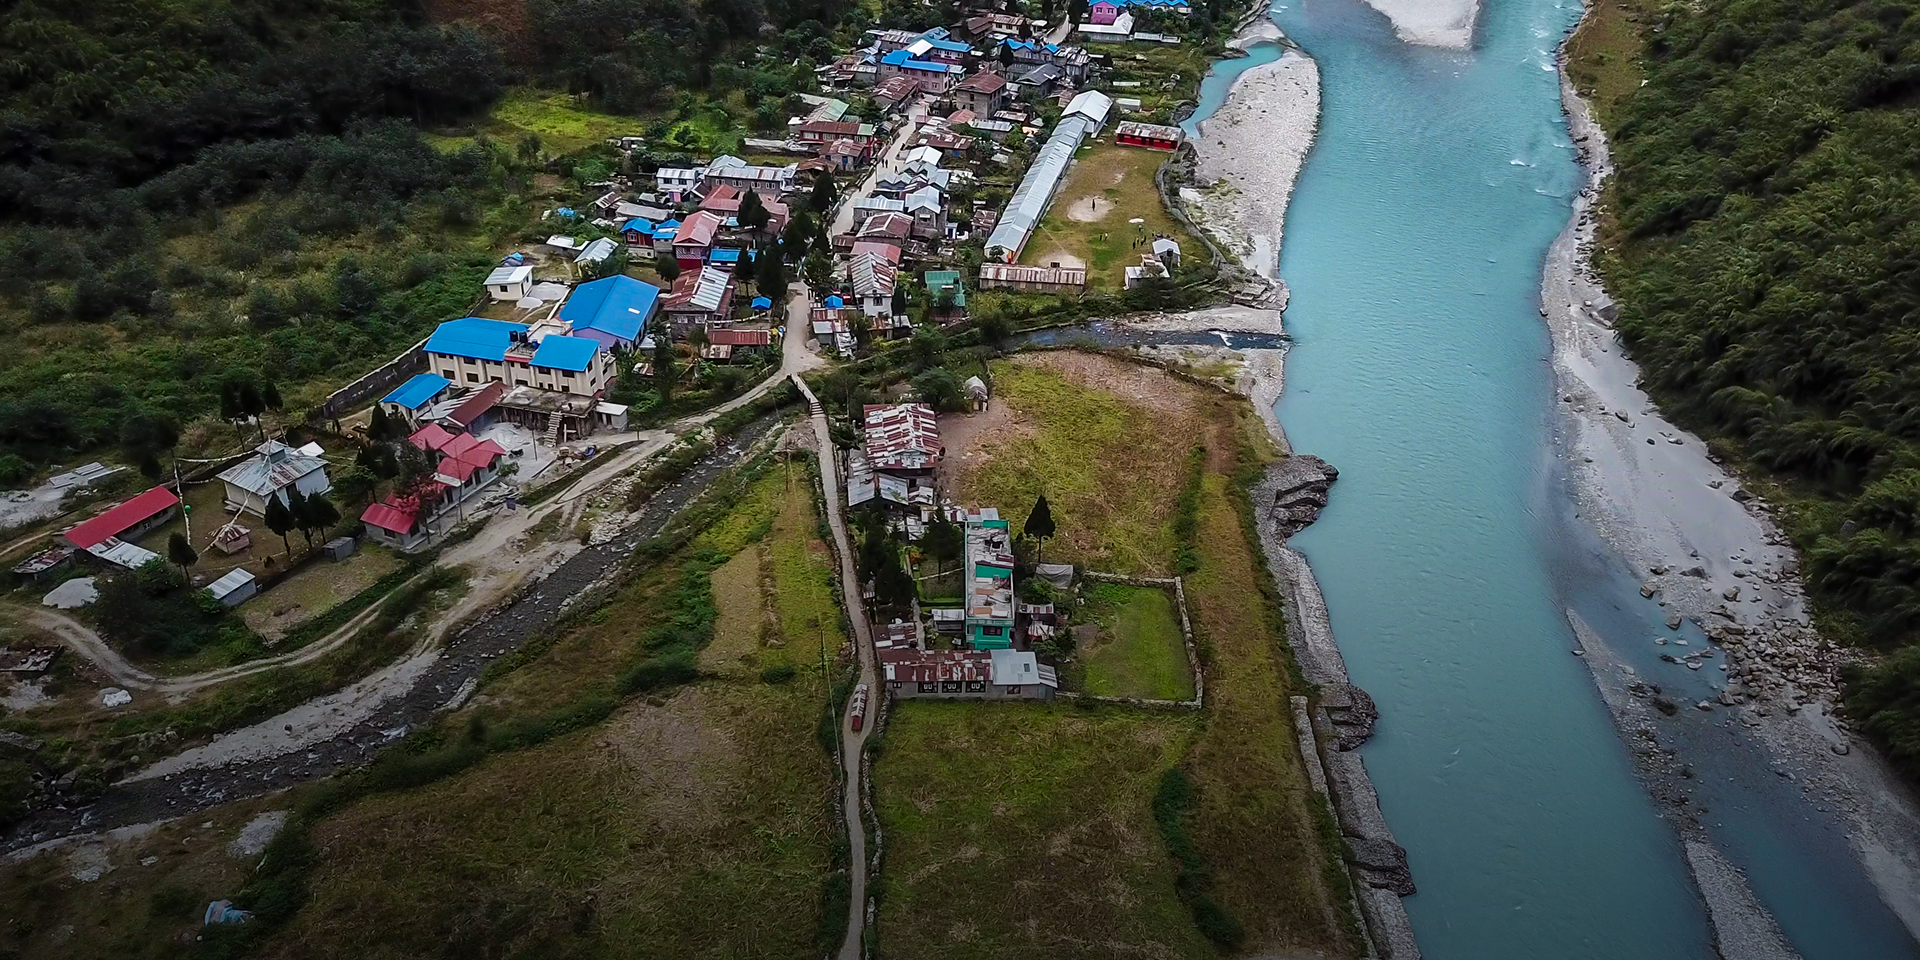 An aerial view of a large town on the edge of a blue river.